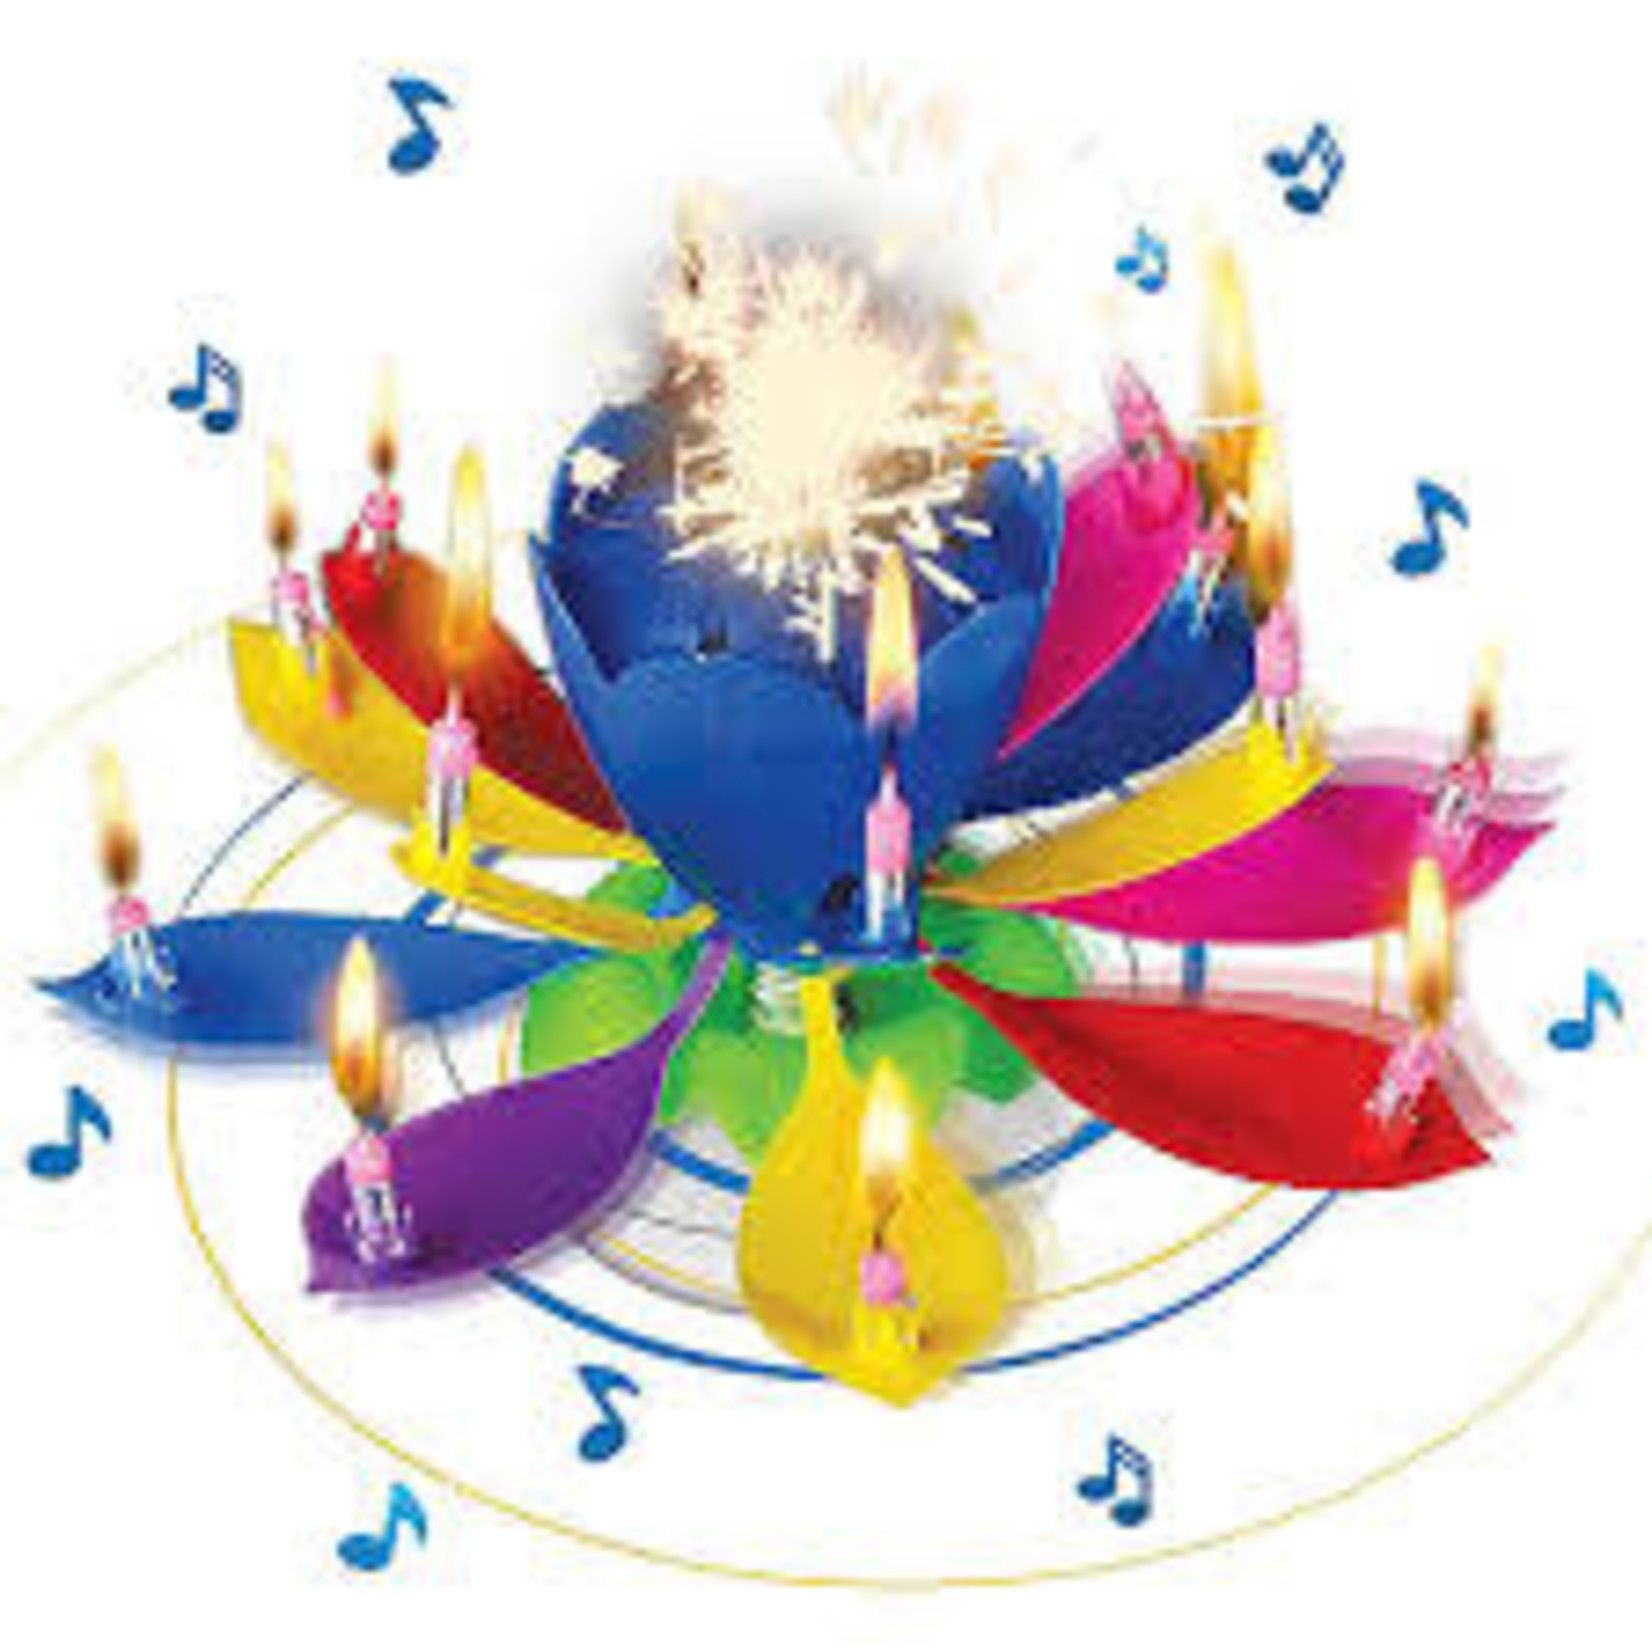 Spinning Musical Flower Candle